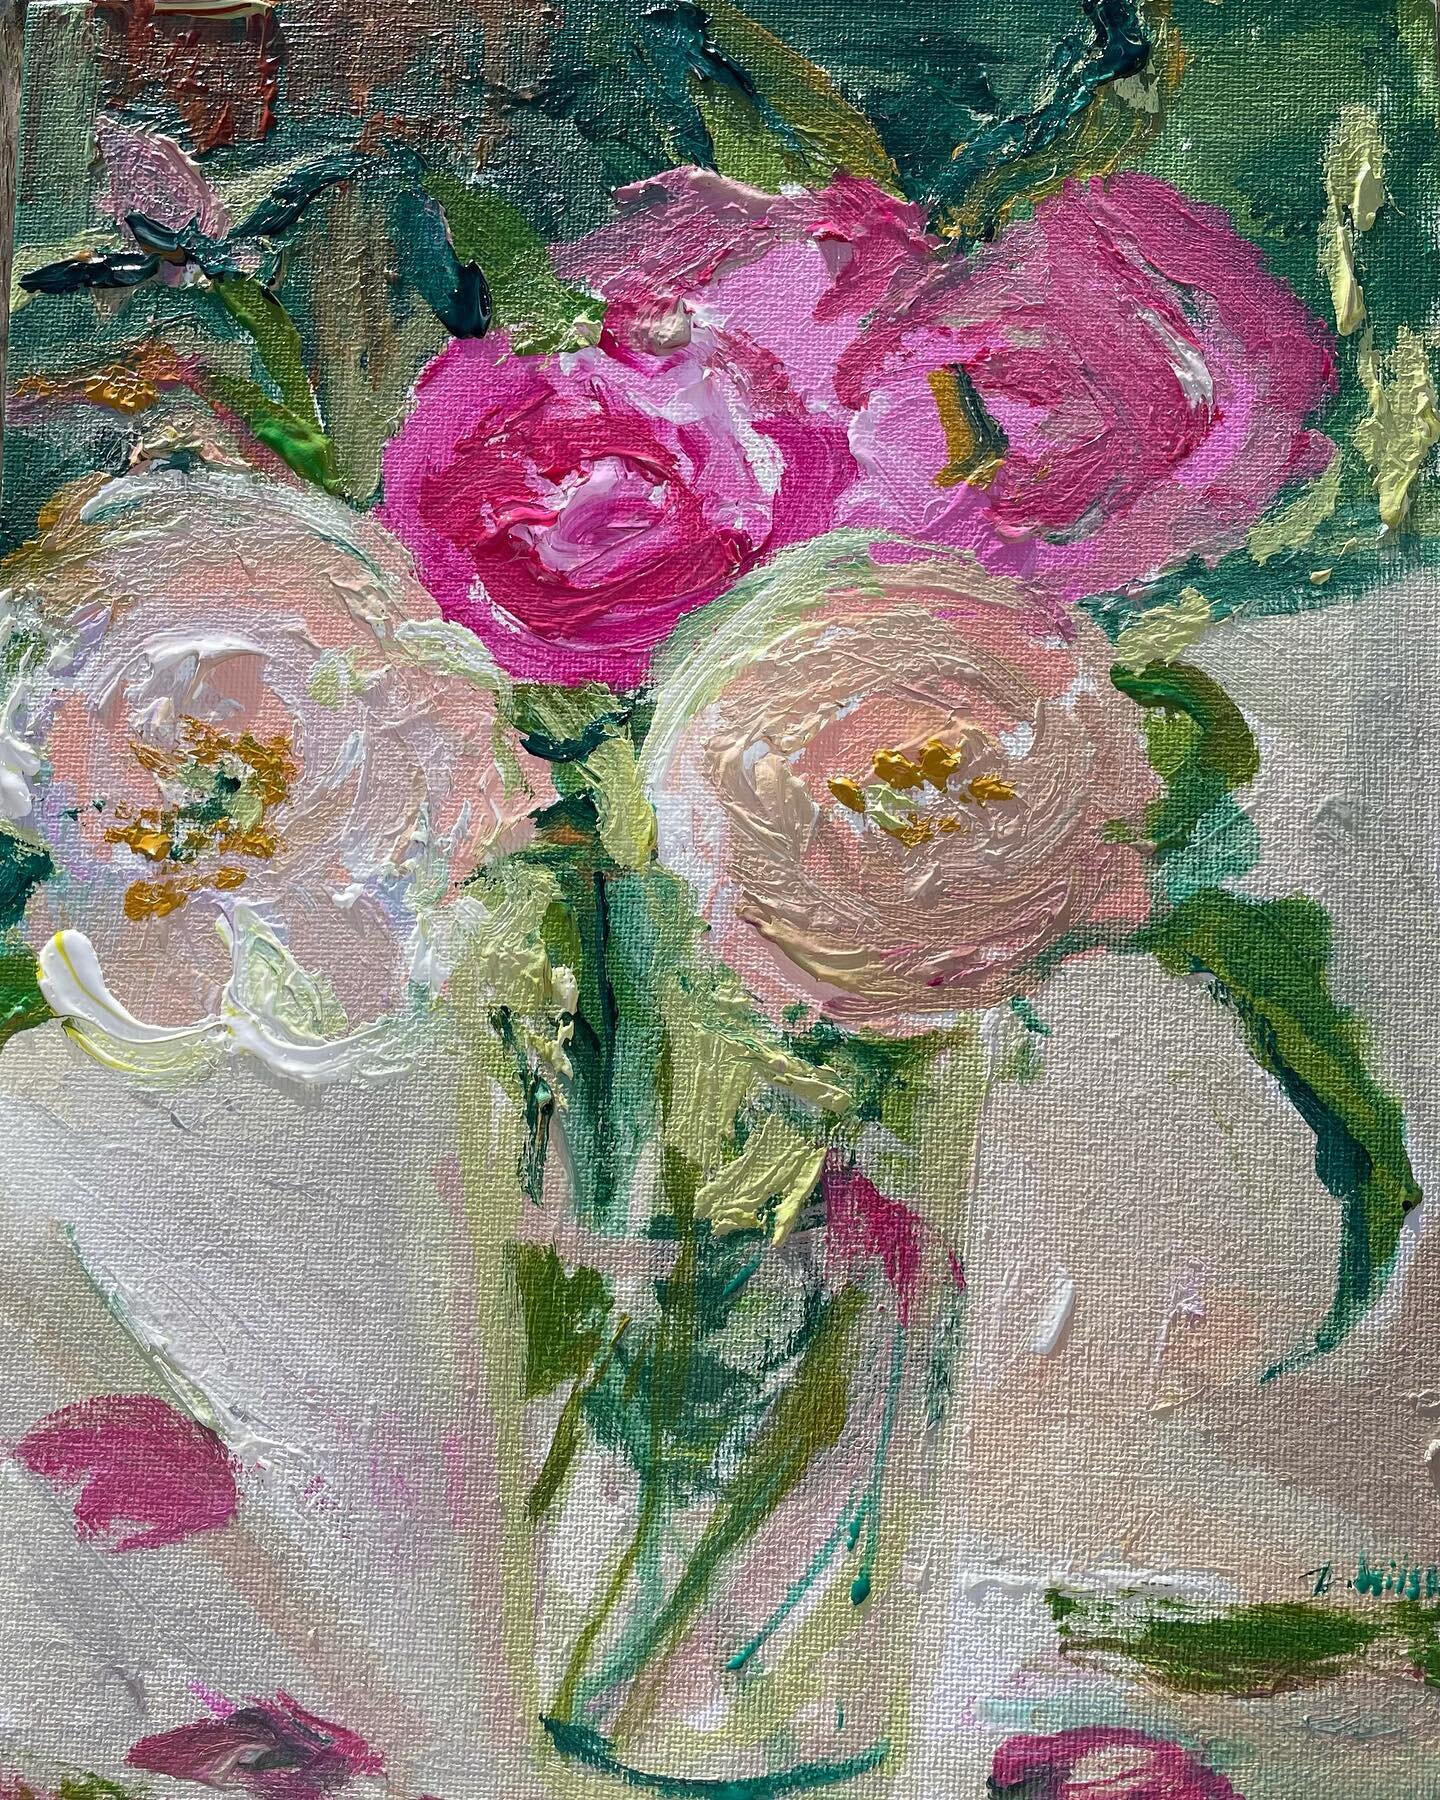 SOLD 🔴&rsquo;Peak Rose Time&rsquo;, acrylic on board, 10&rdquo;x12&rdquo;, &pound;200 unframed as per @artistsupportpledge plus &pound;8.50 P&amp;P
&bull;
&bull;
&bull;
#summertime #peaksummer #rosepainting #roses #flowerpower2021 #flowerpainting